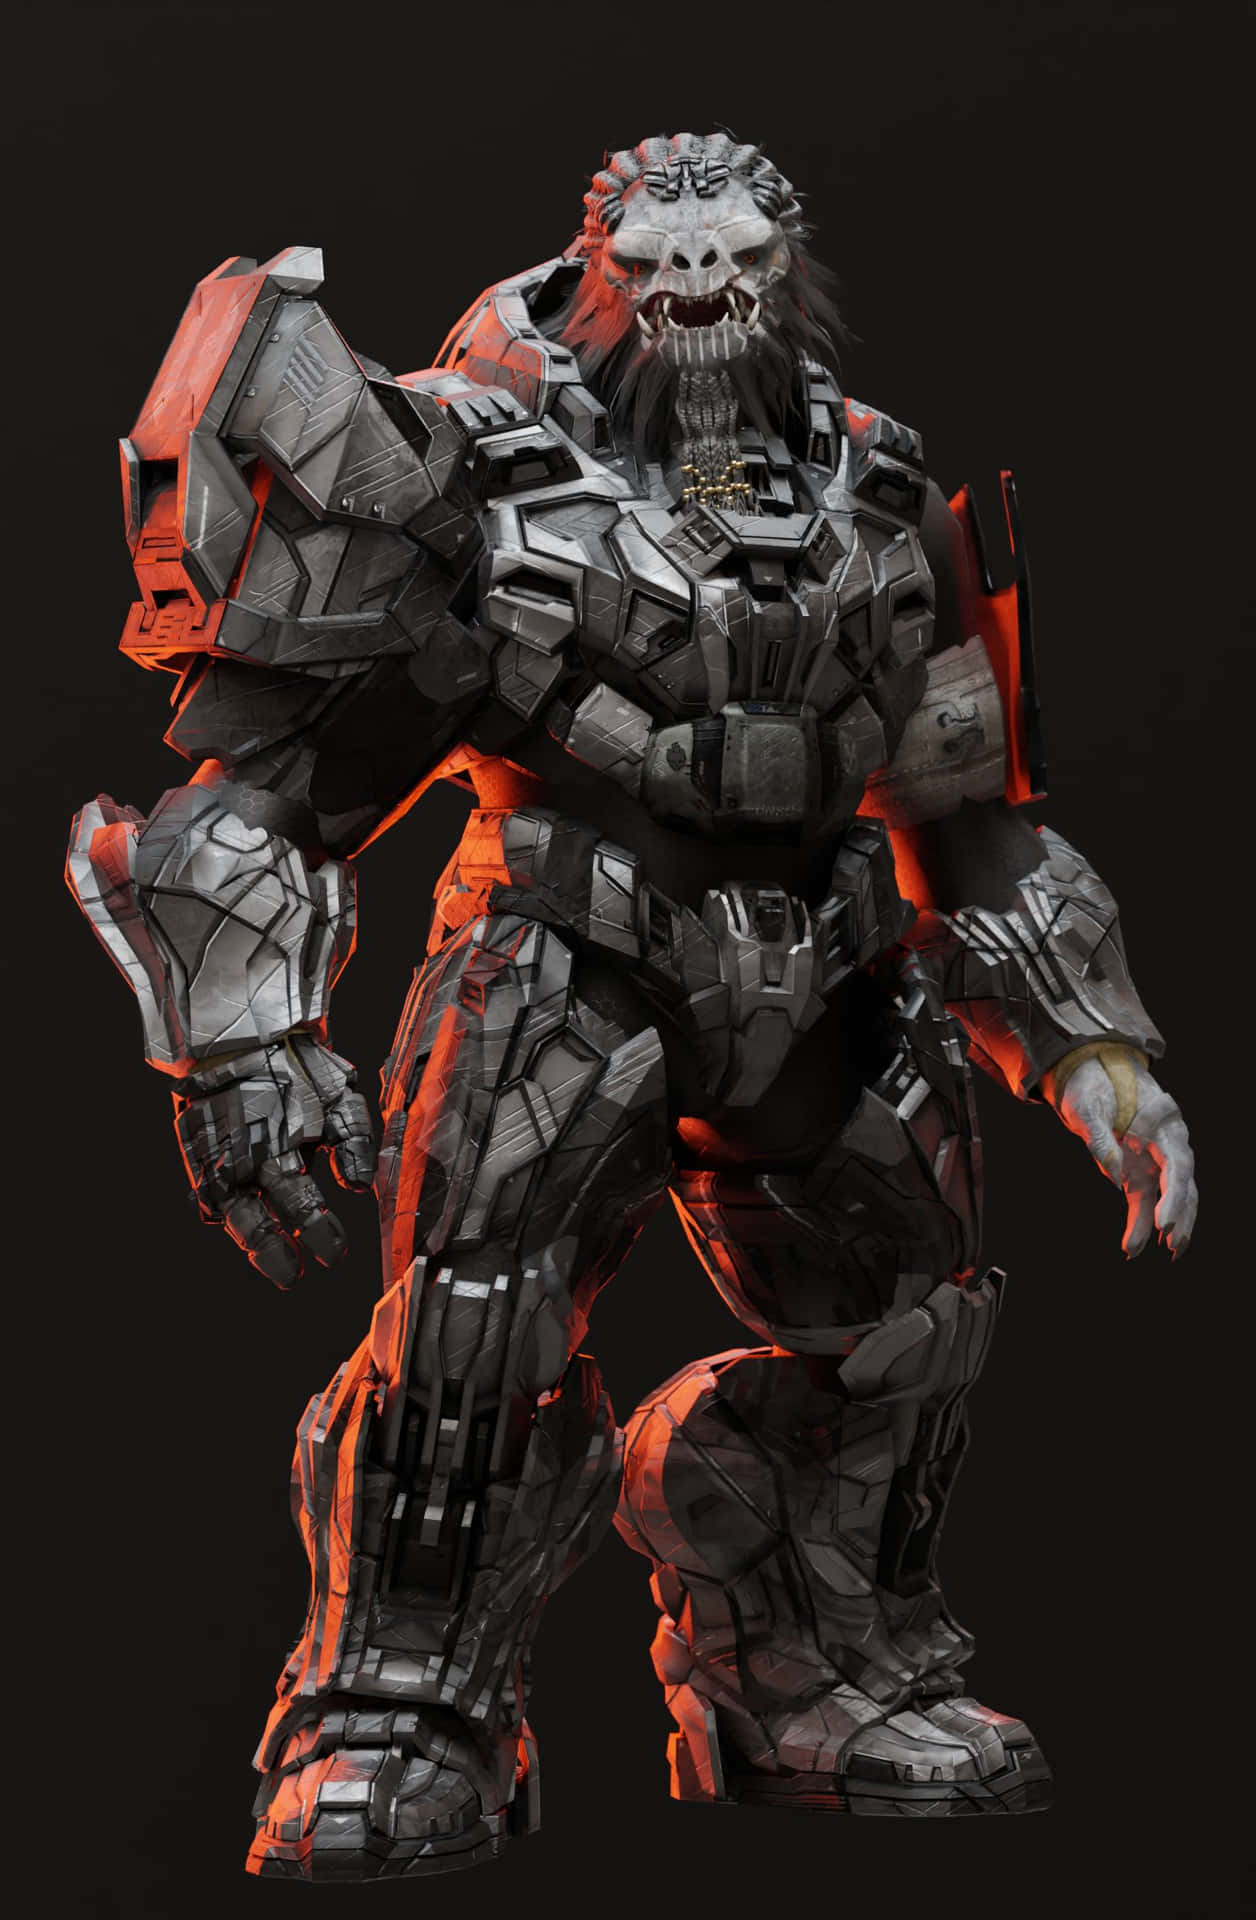 Atriox, the menacing warlord, ready for battle Wallpaper